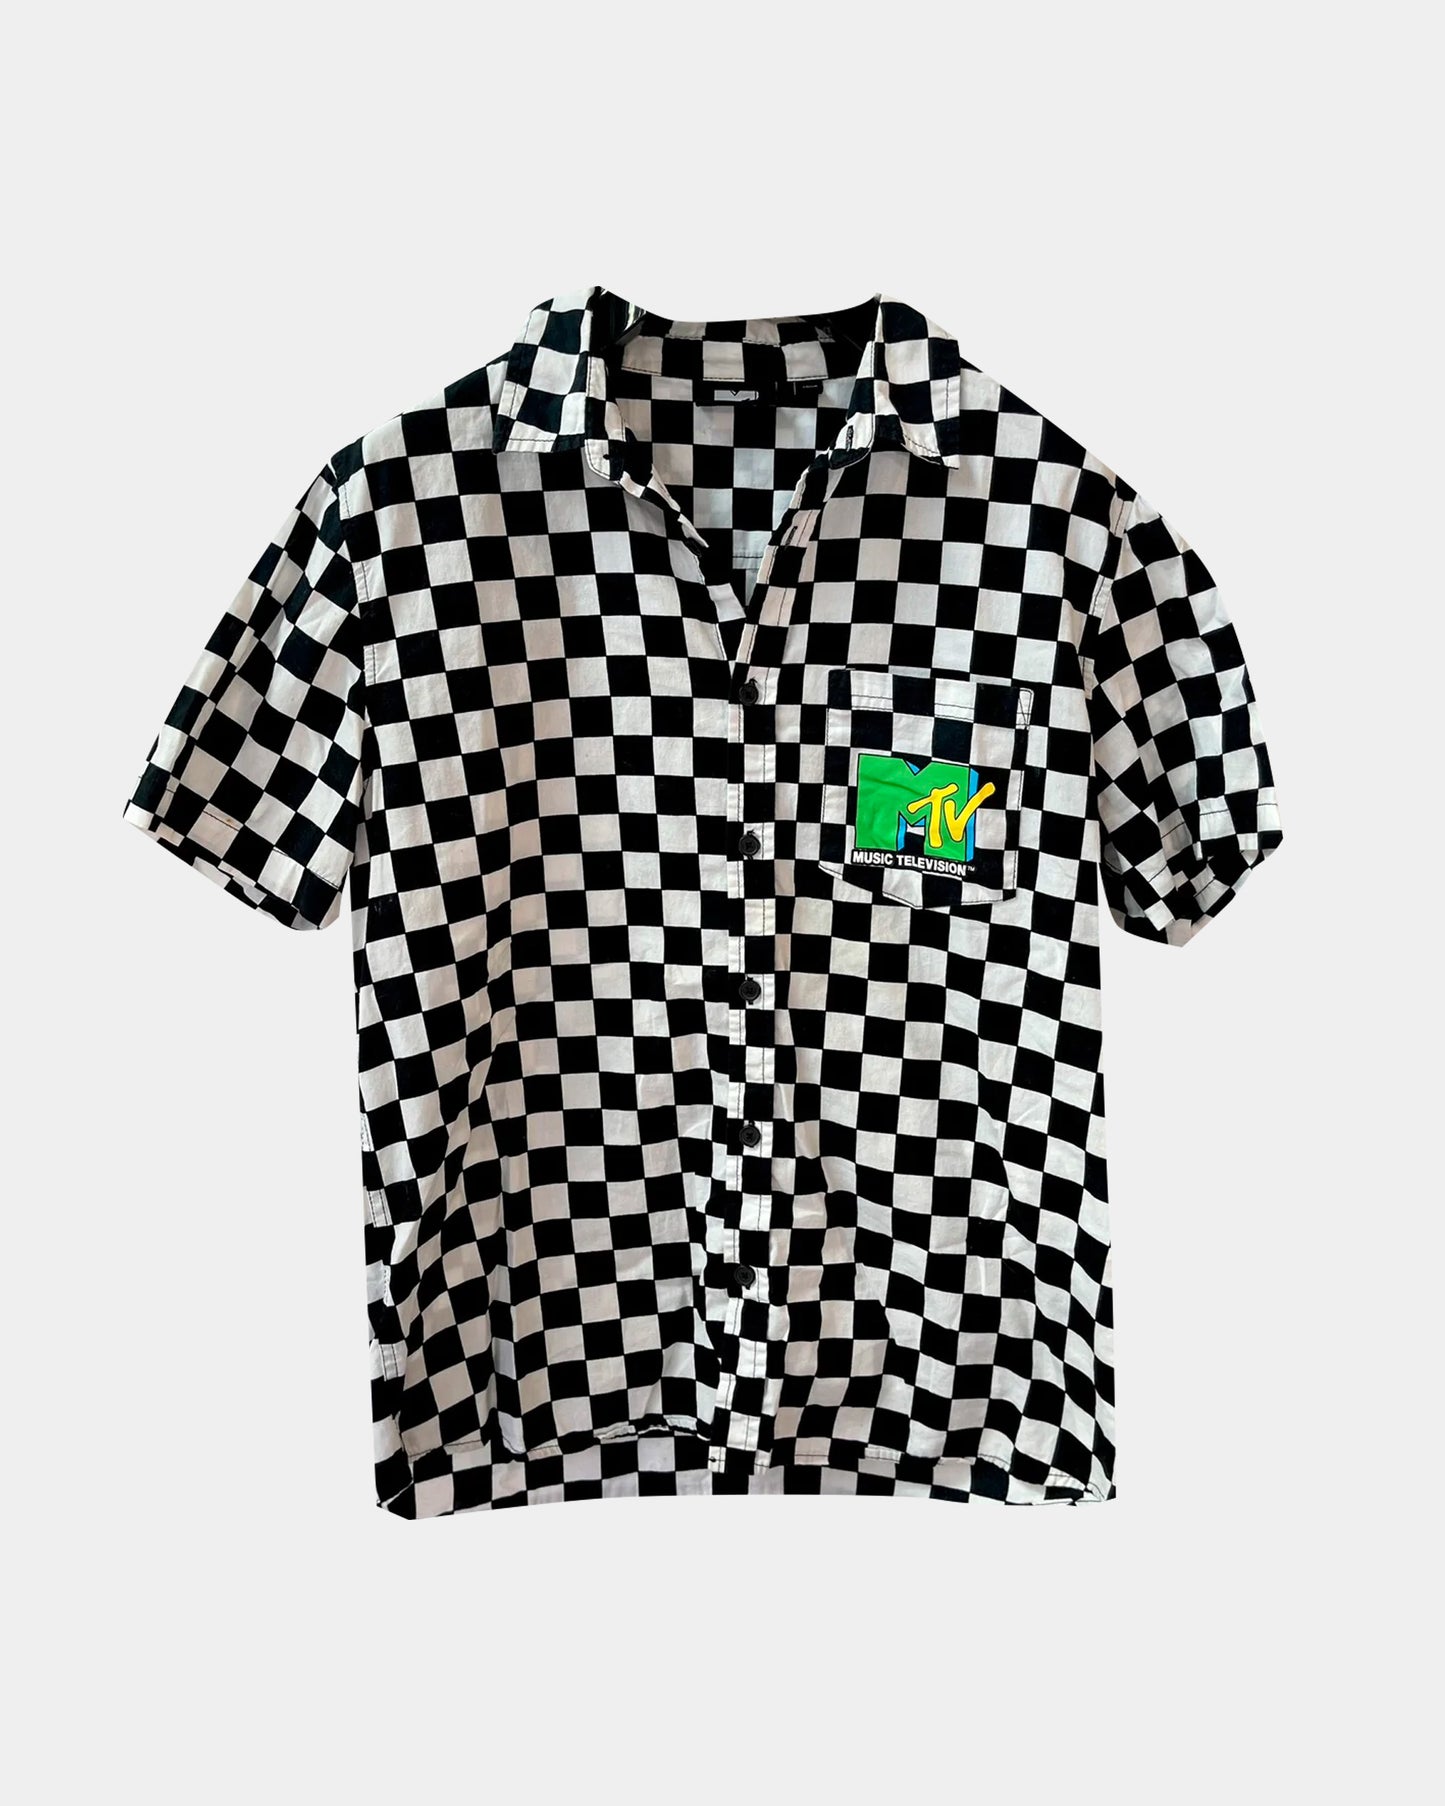 Vintage MTV Checkered Button Up Party Or Vacation Shirt